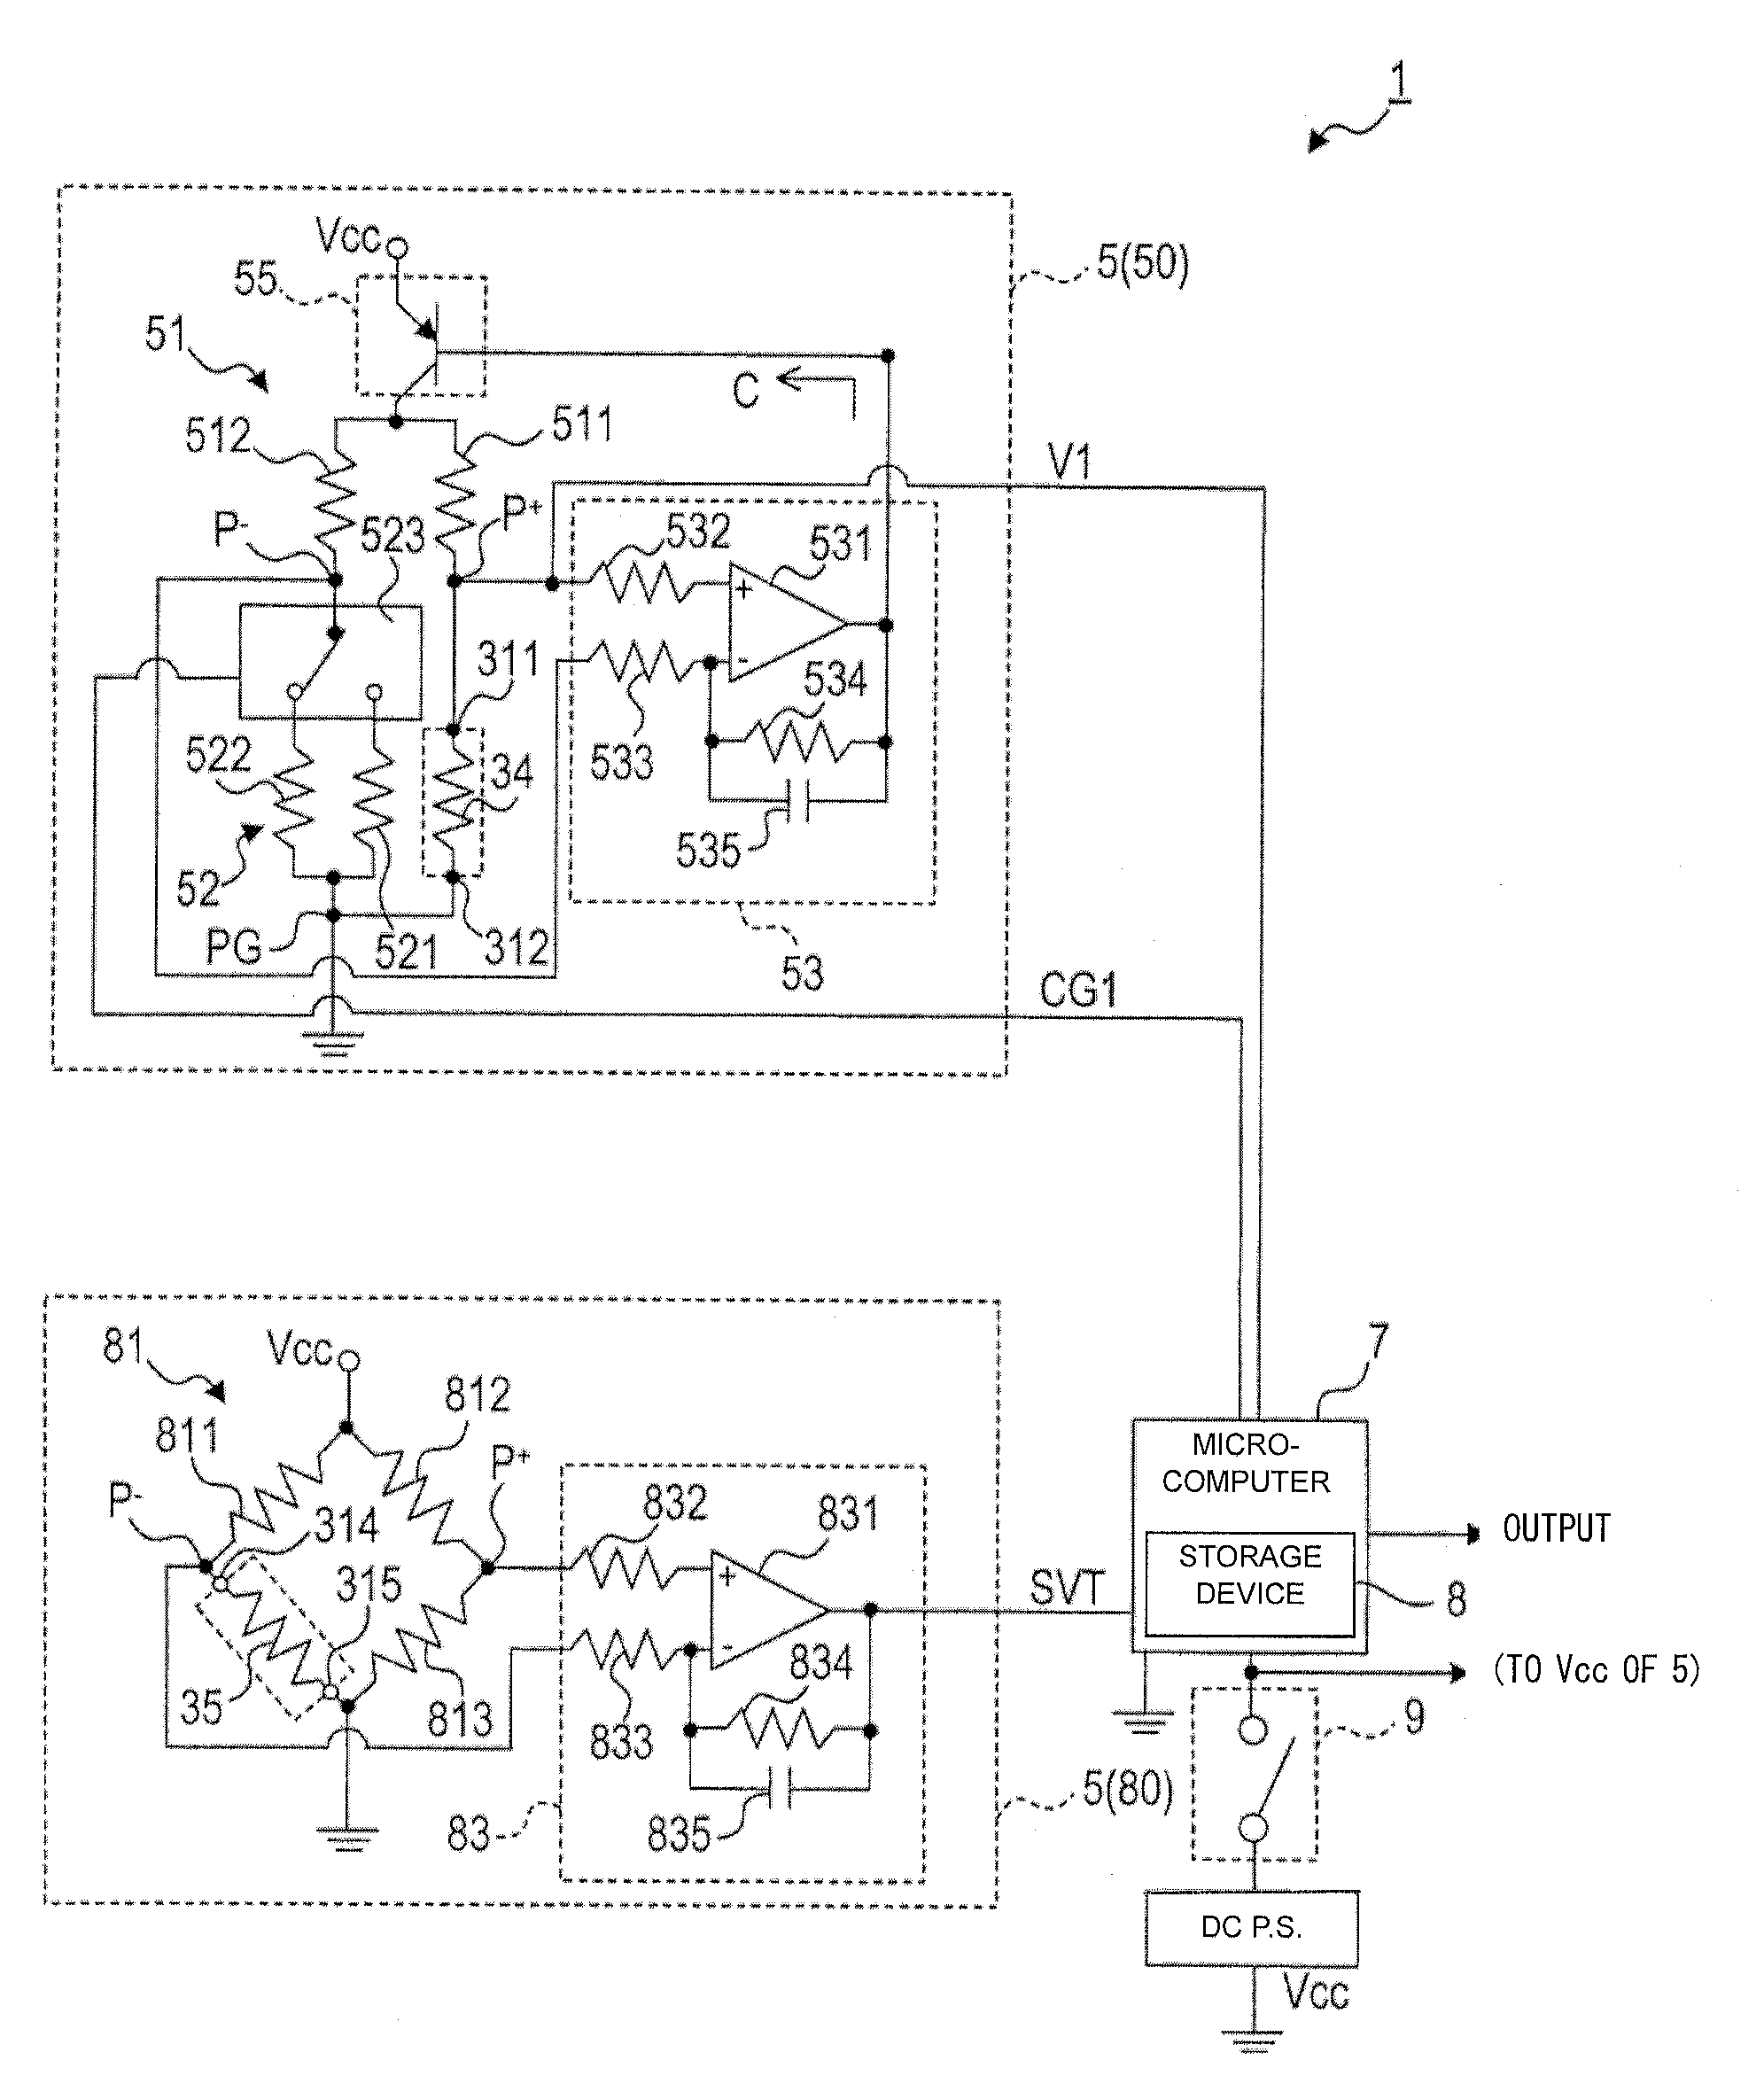 Combustible gas detection device